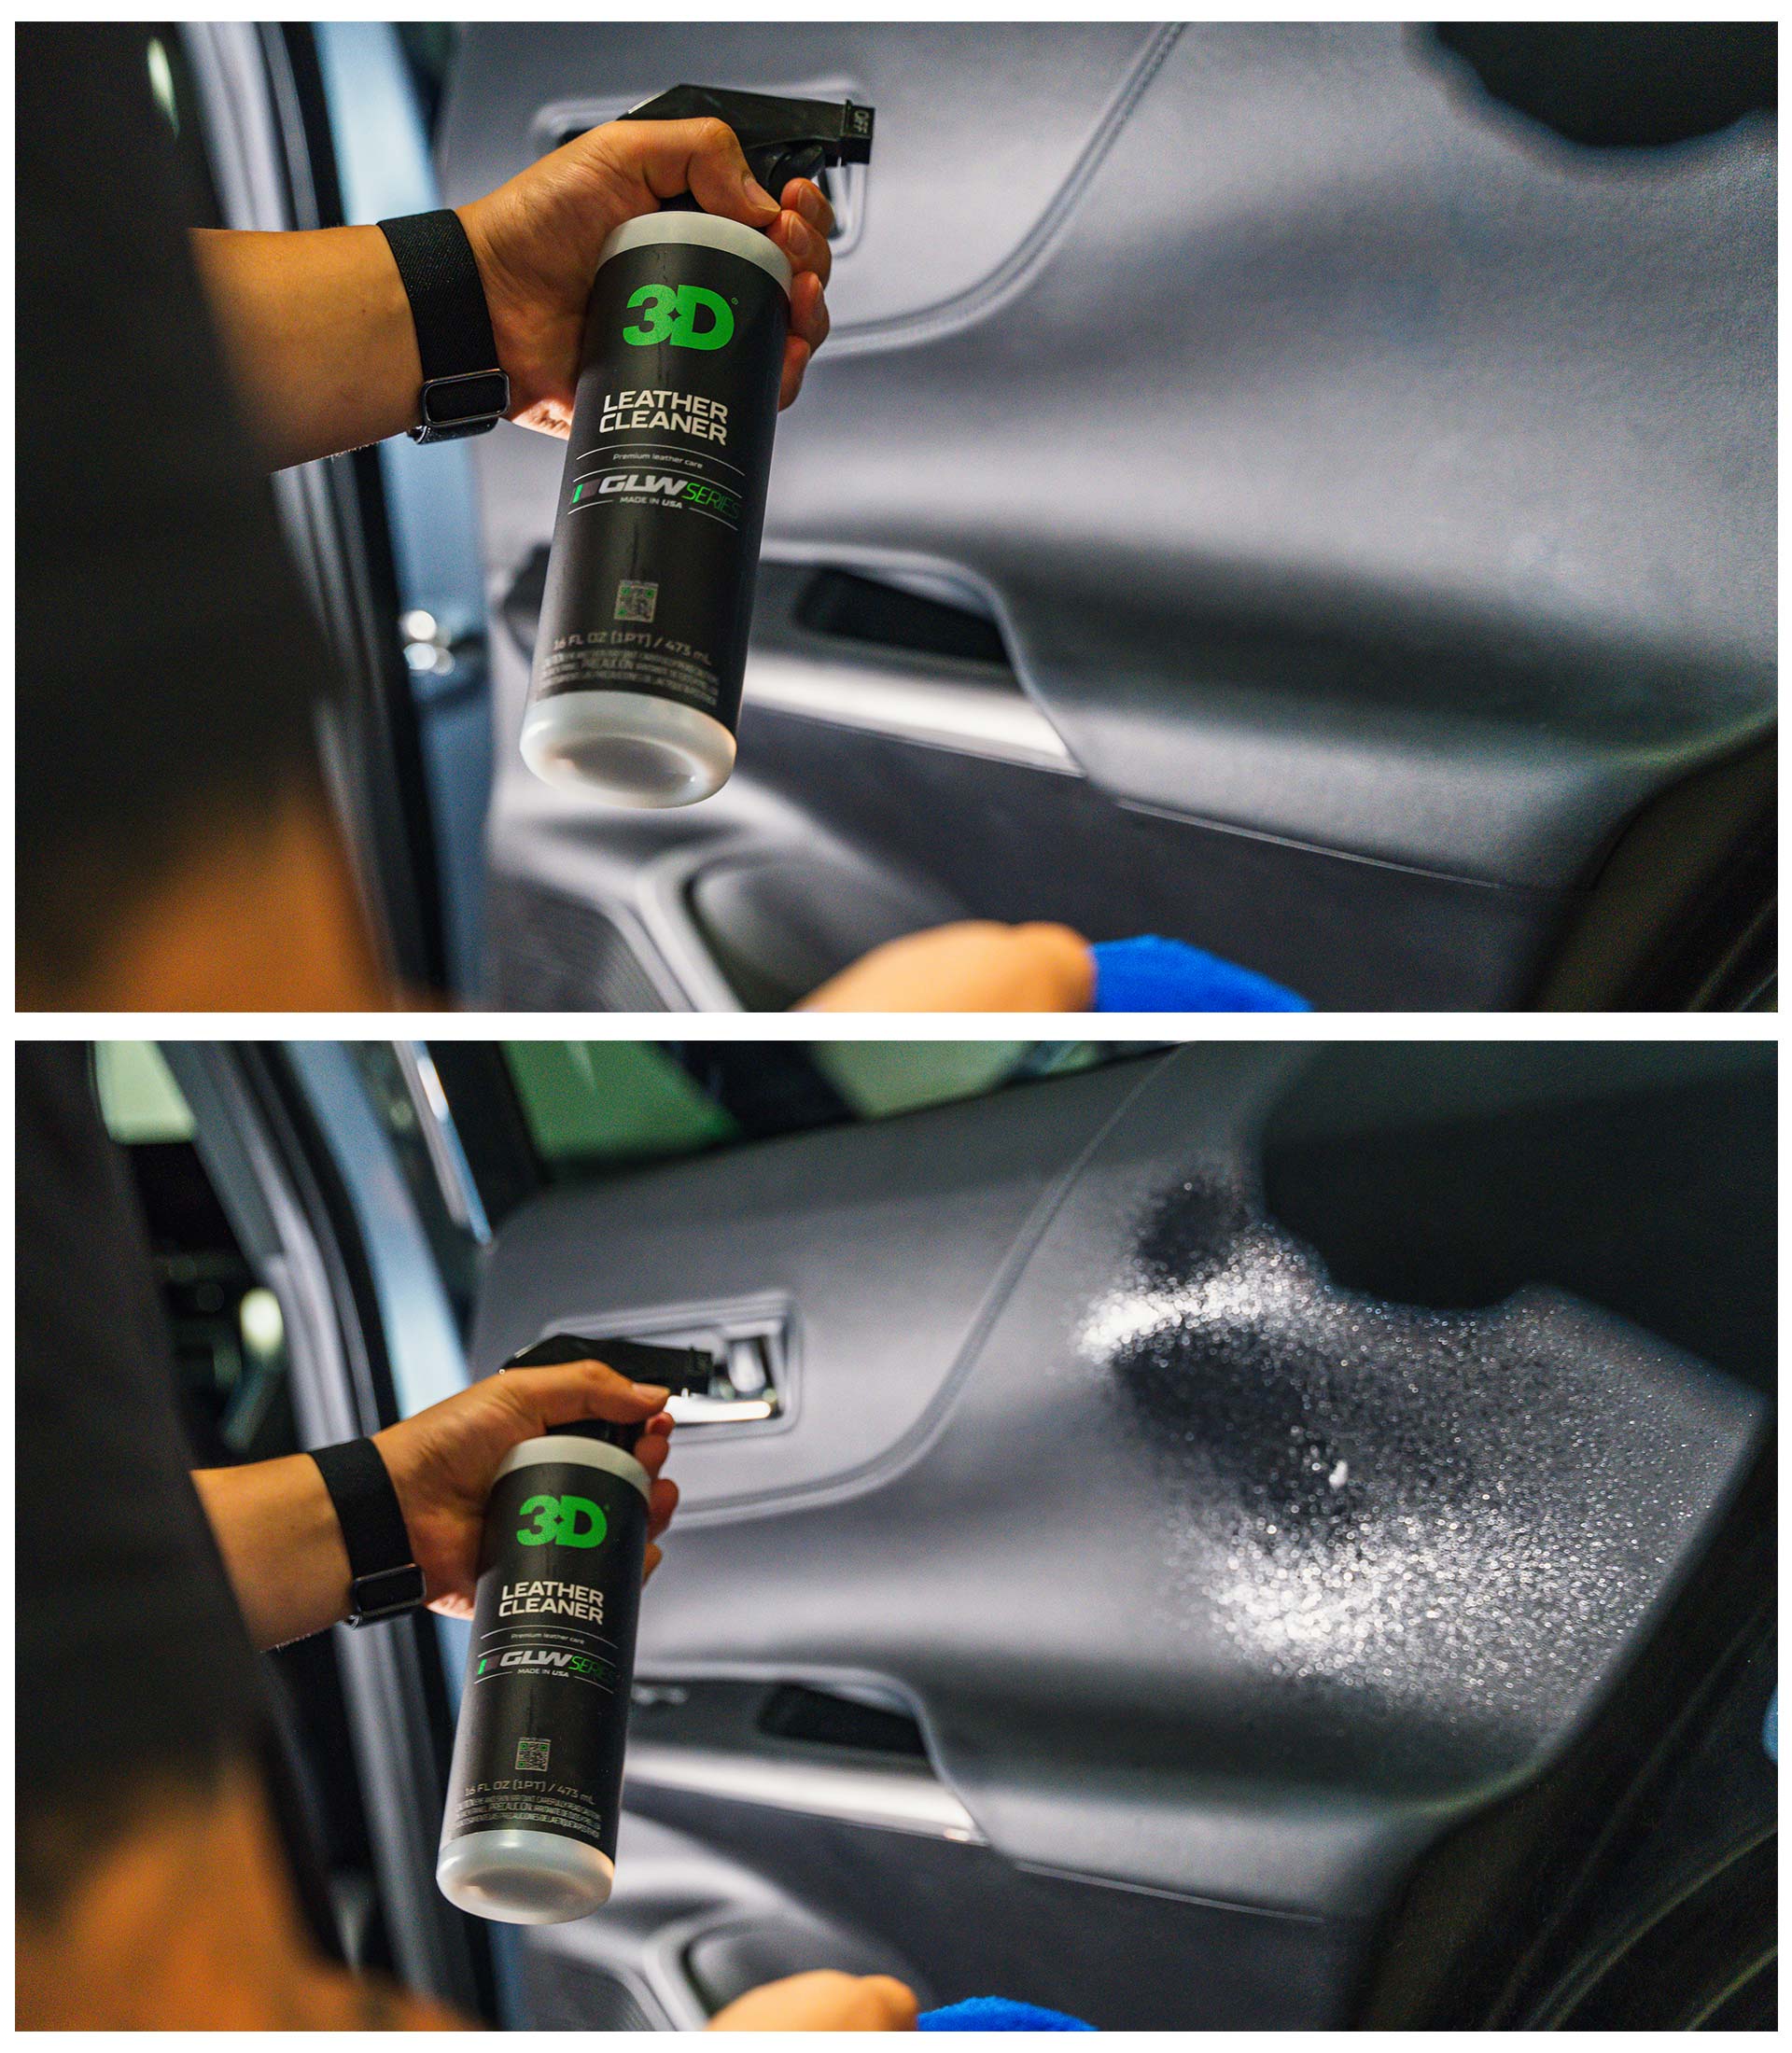 3d glw leather cleaner on black leather door panel